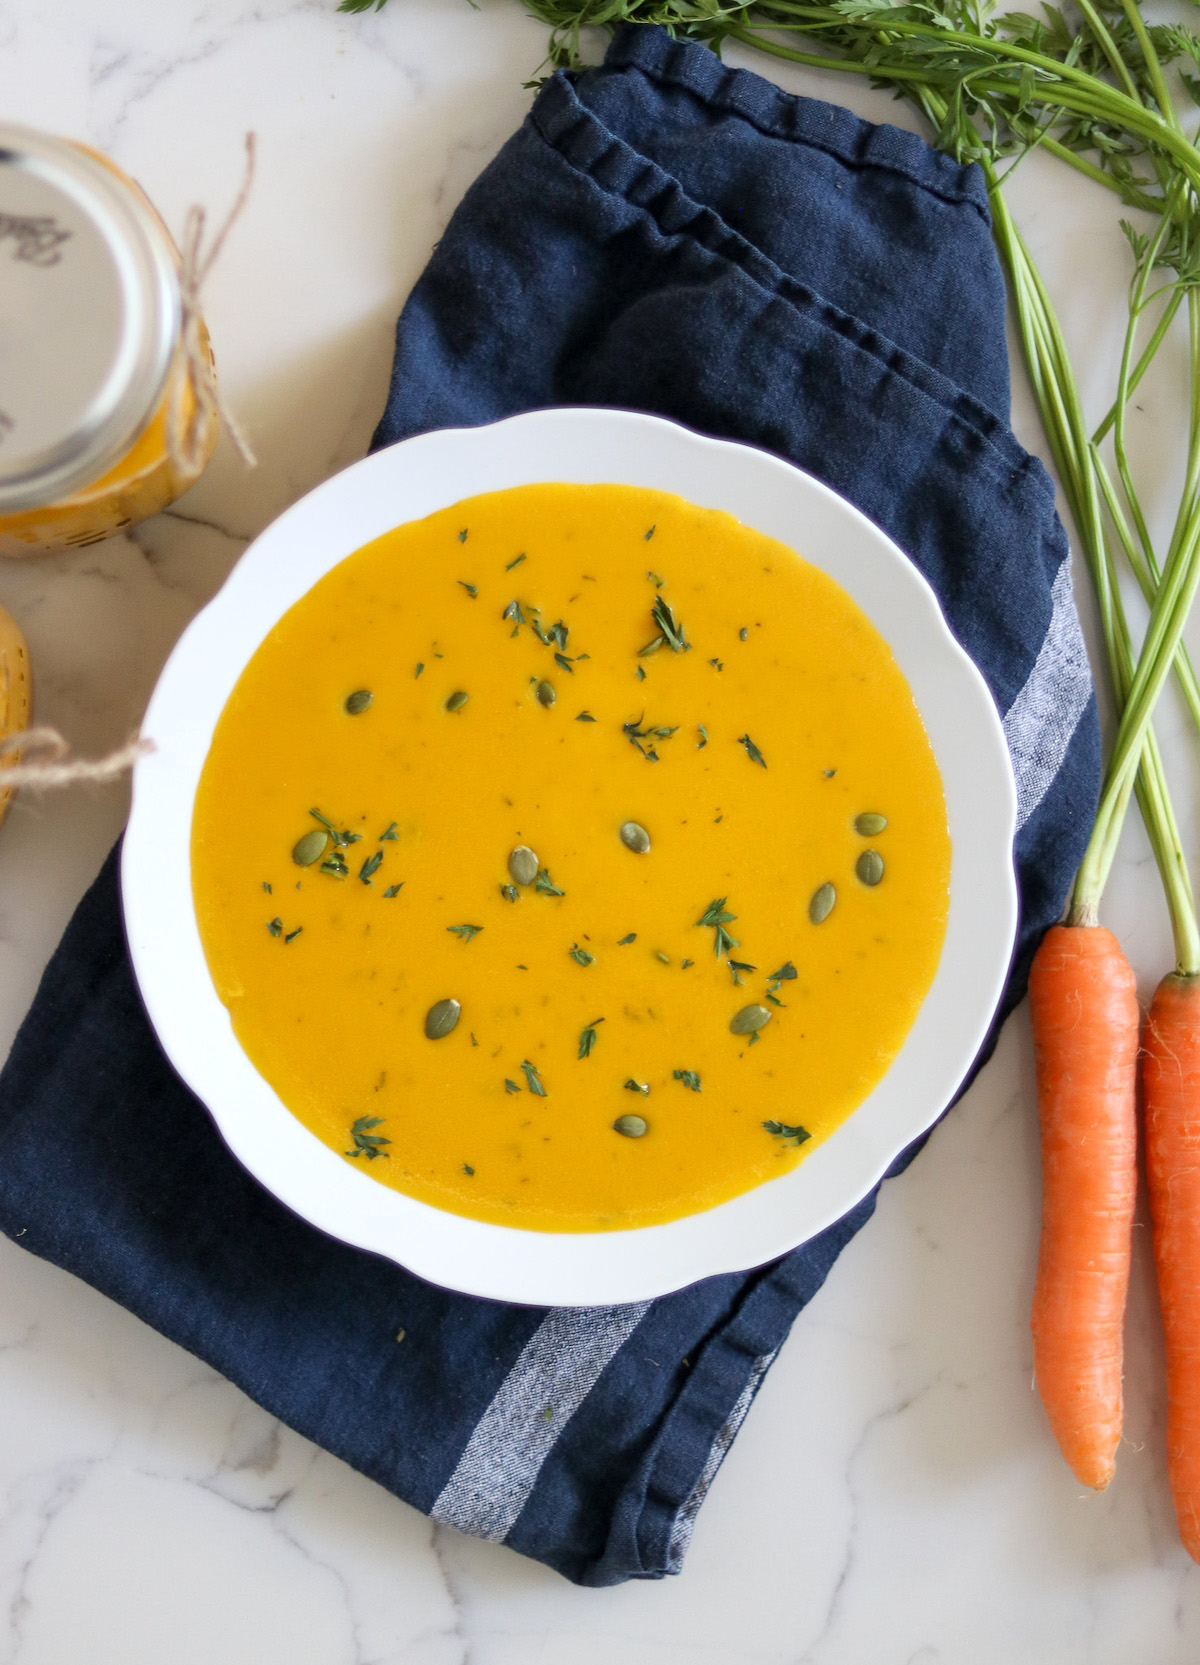 Serving Home Canned Carrot Soup